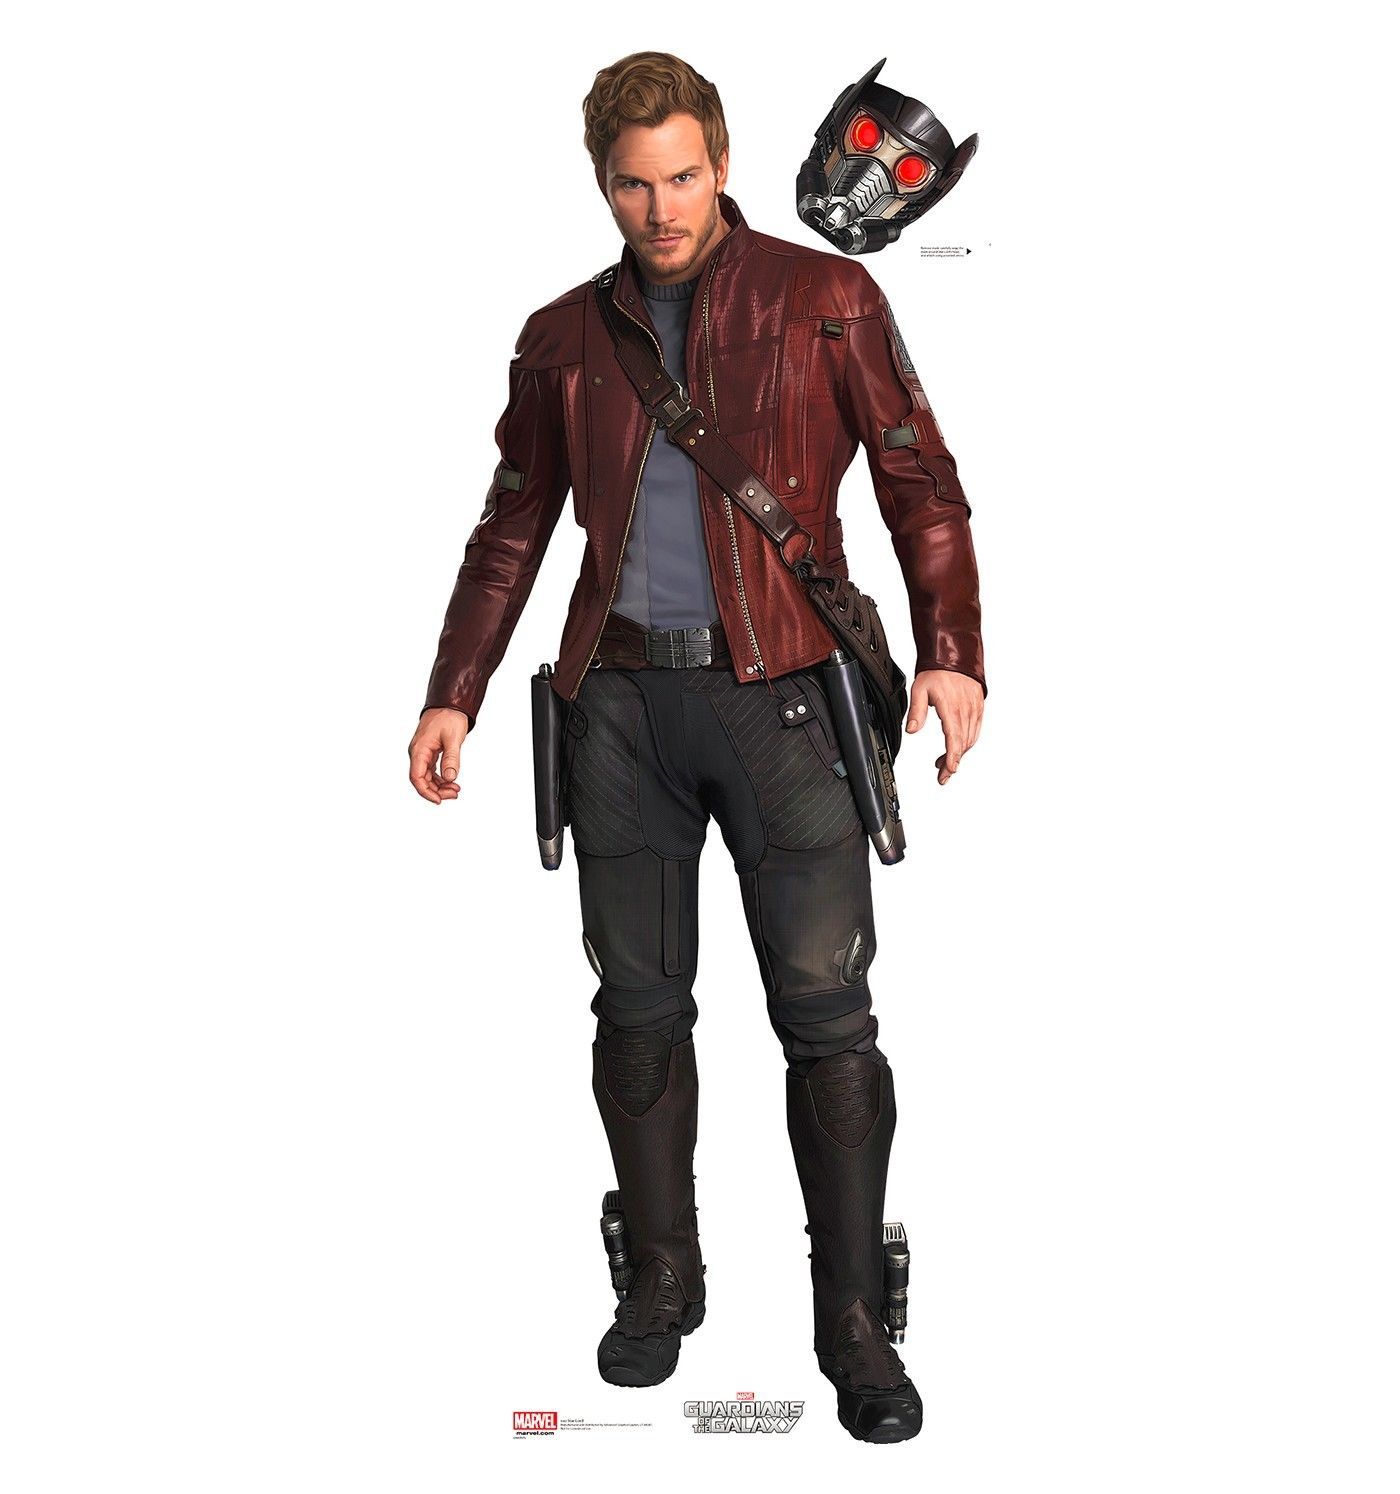 Guardians of the Galaxy Wall Decals #1